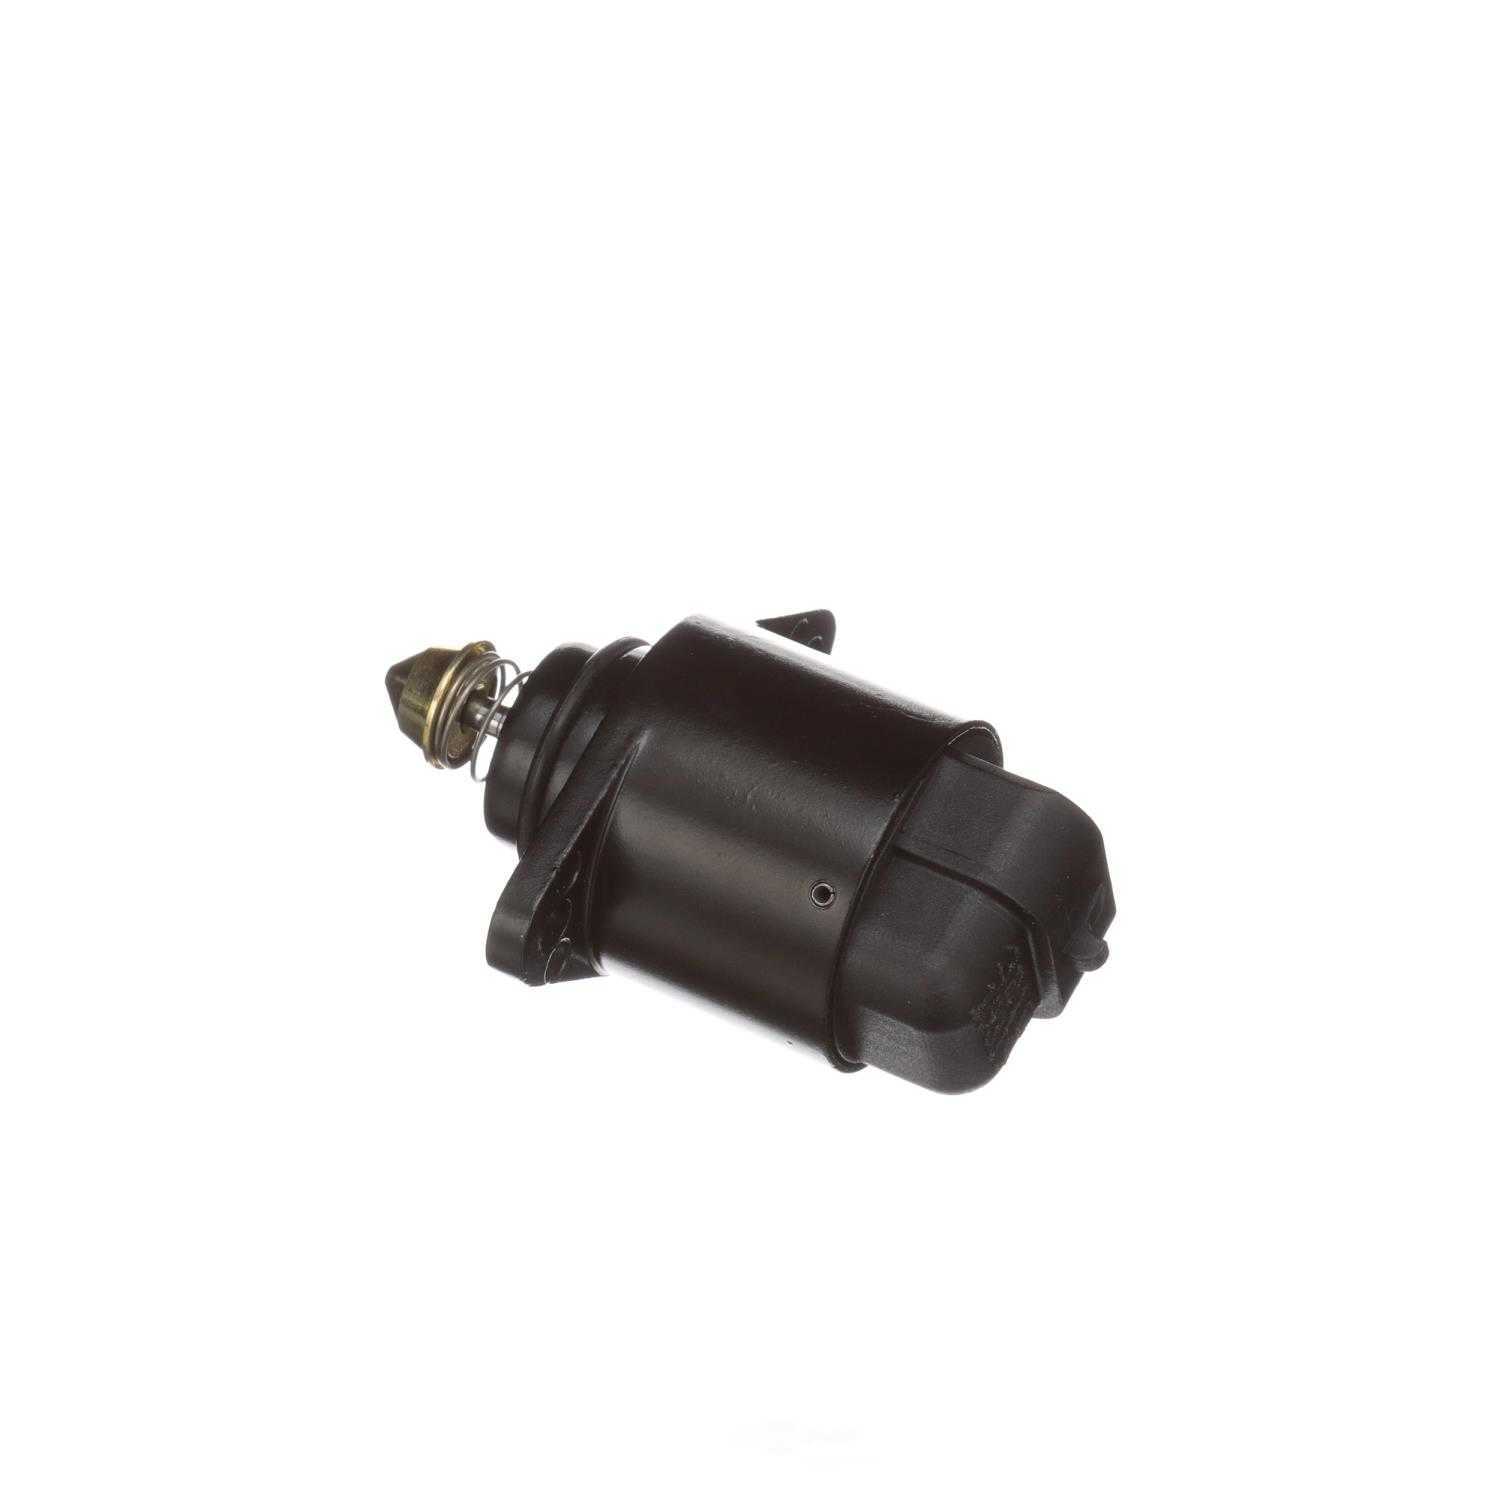 STANDARD MOTOR PRODUCTS - Idle Air Control Valve - STA AC15